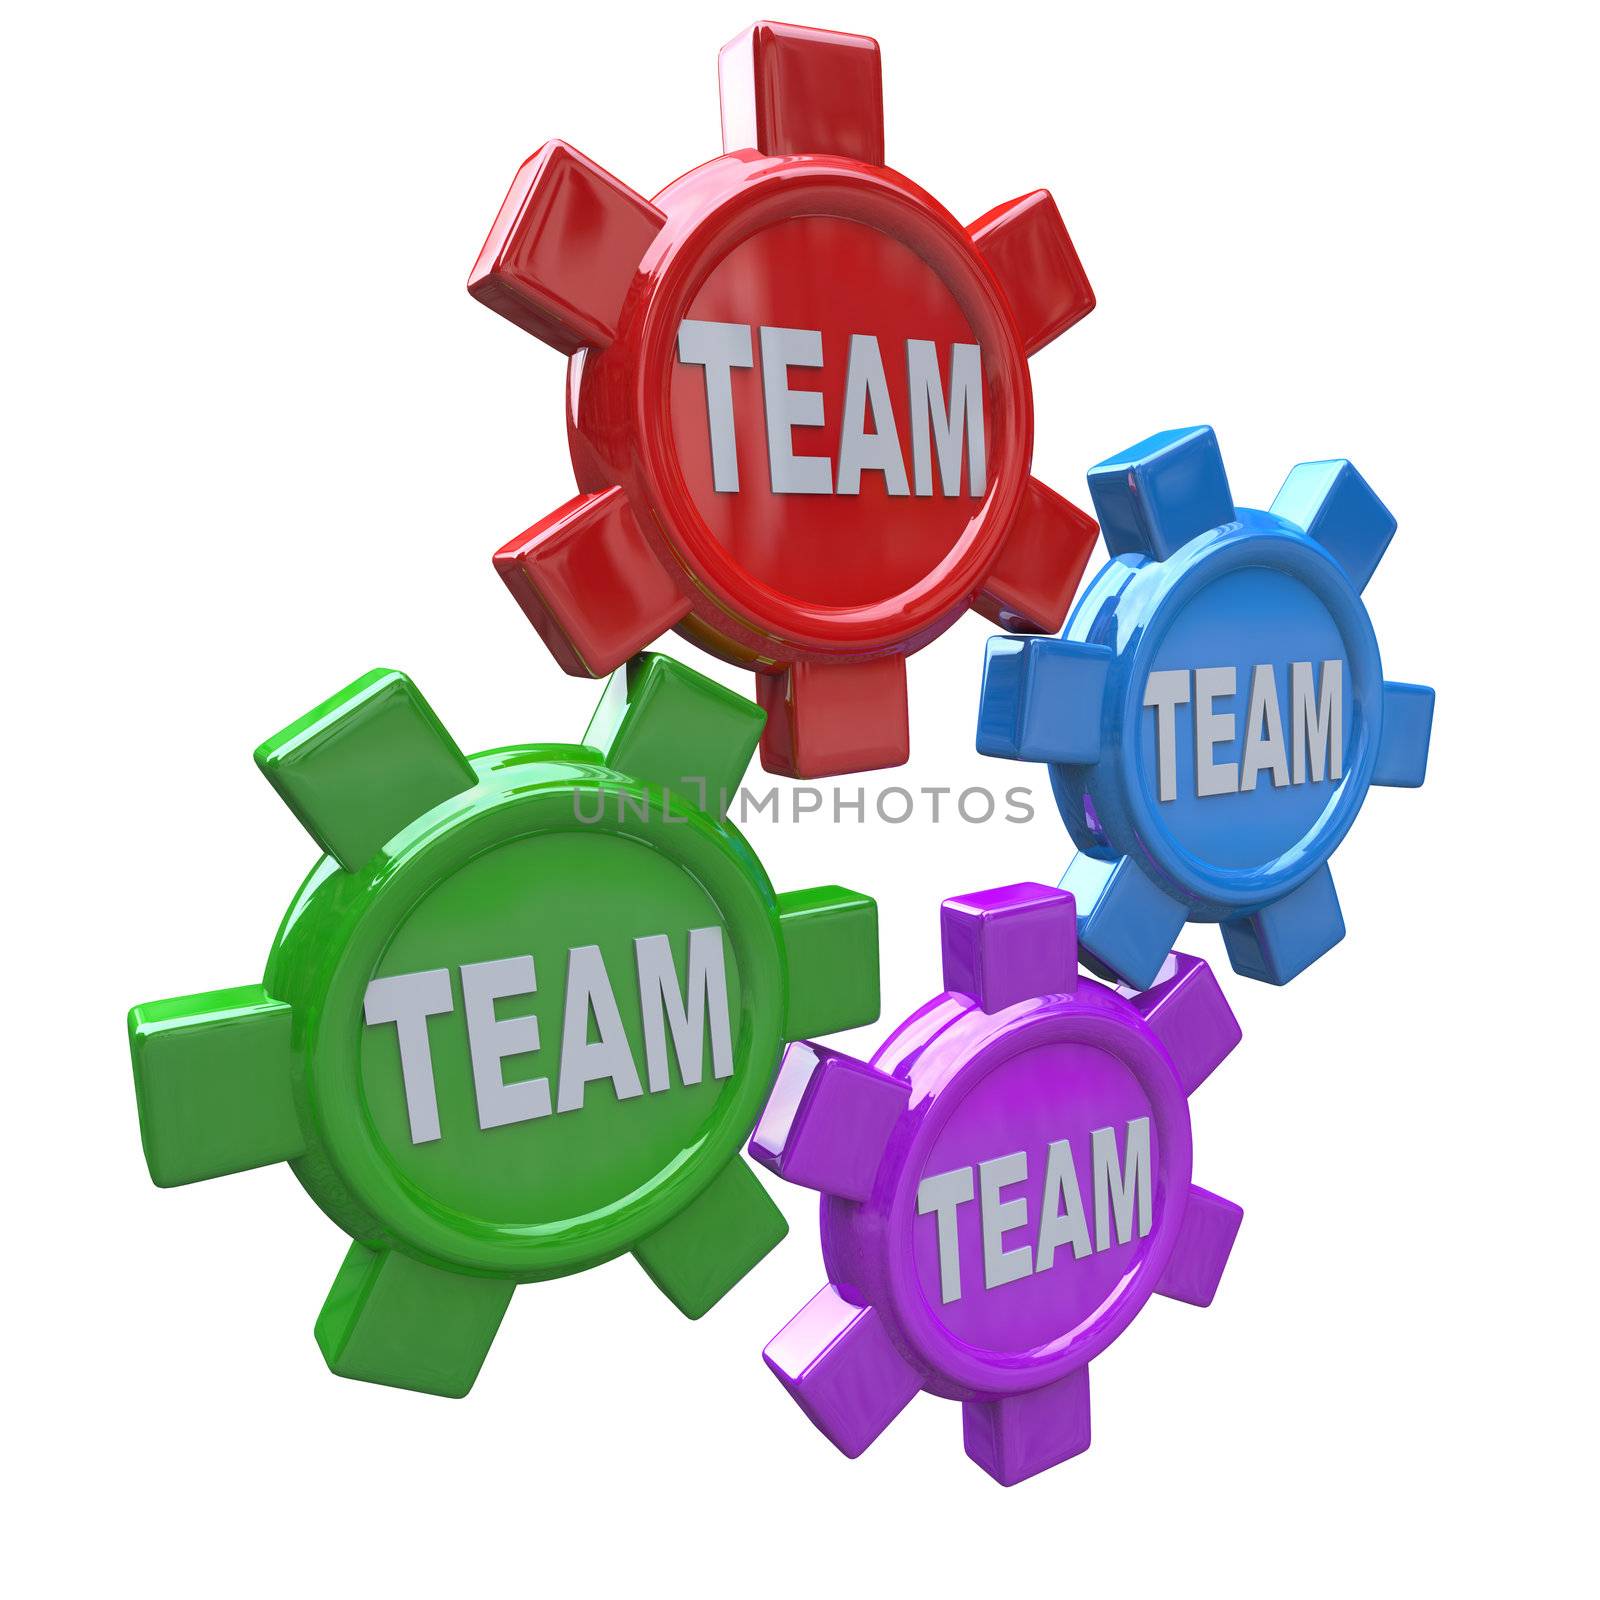 Teamwork - Four Gears Turning Together as Team by iQoncept